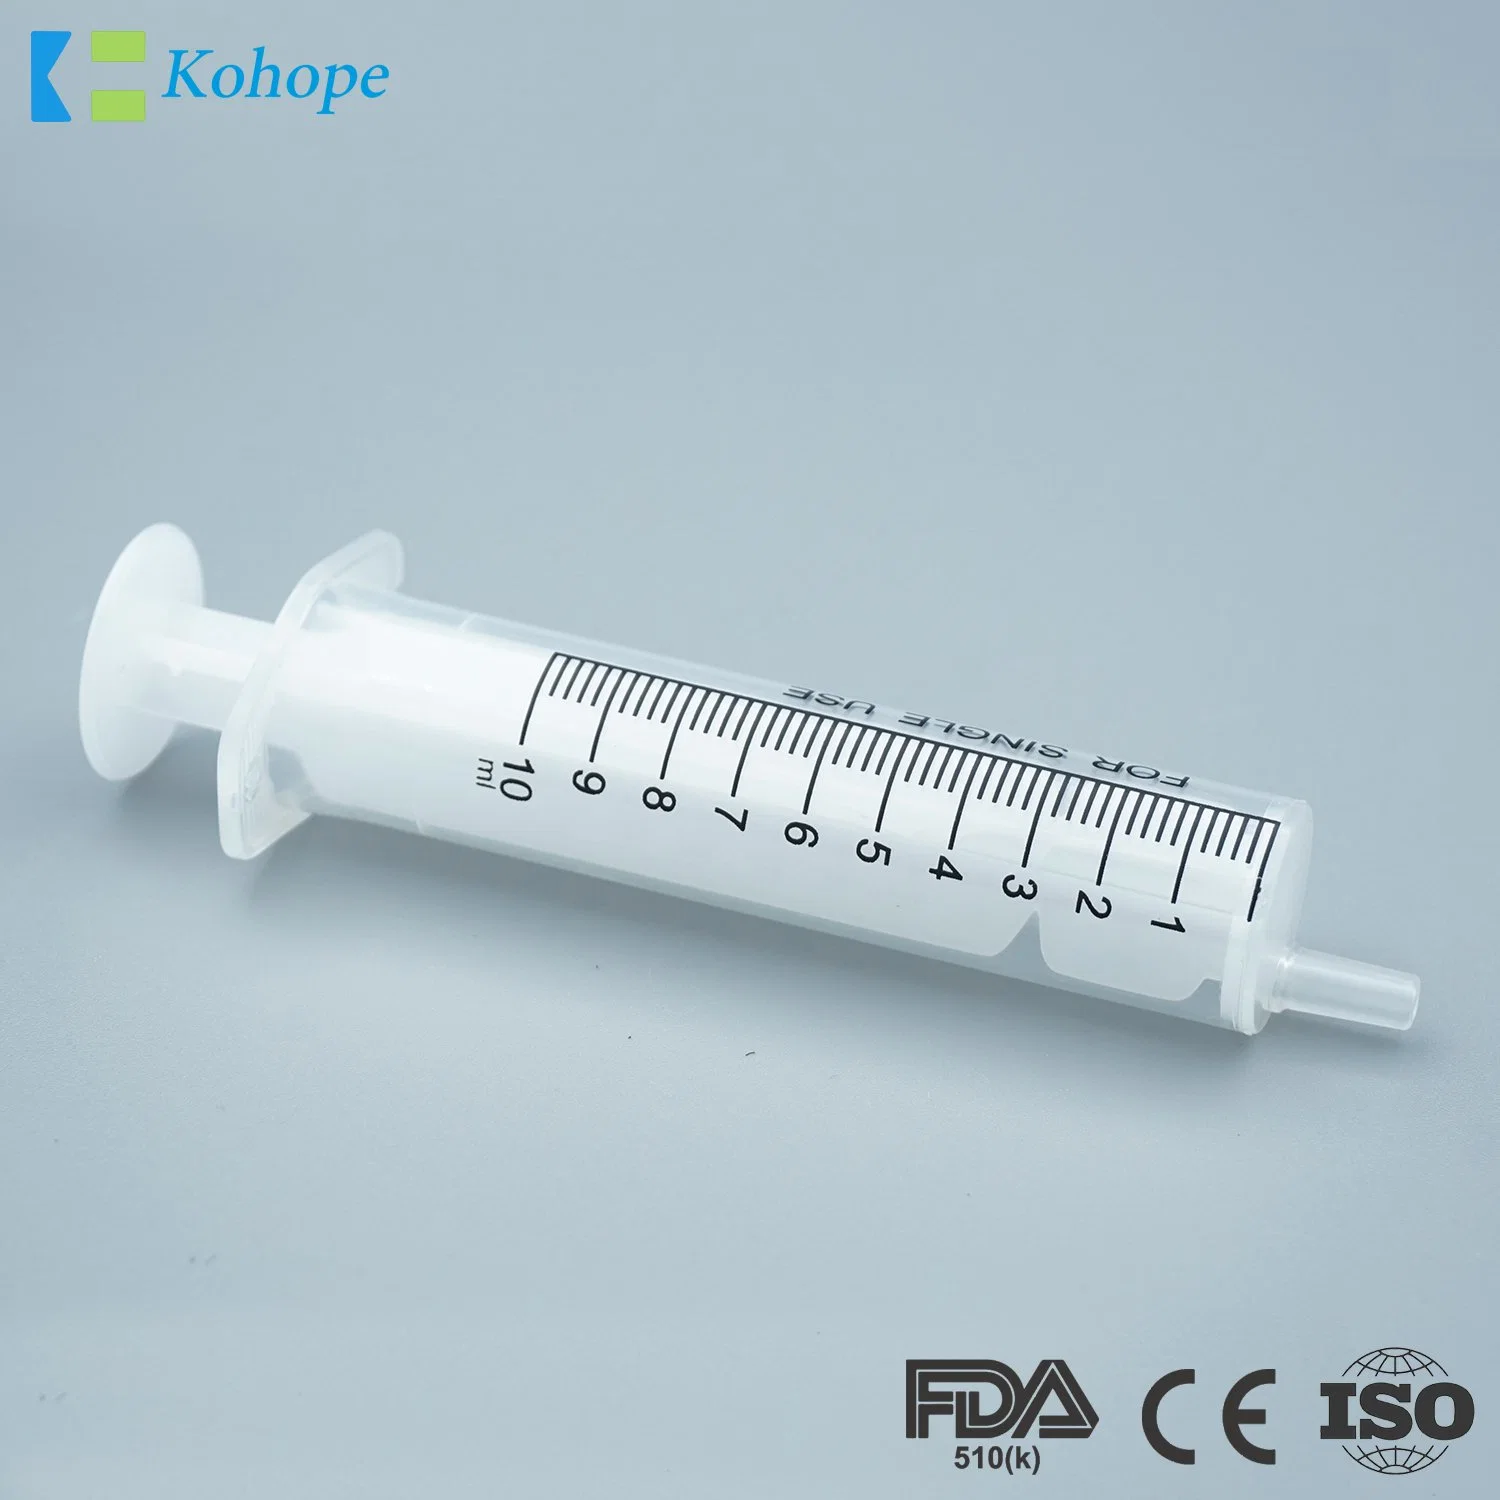 Disposable Medical Luer Lock Latex-Free 2ml 2 Part Syringe for Sale